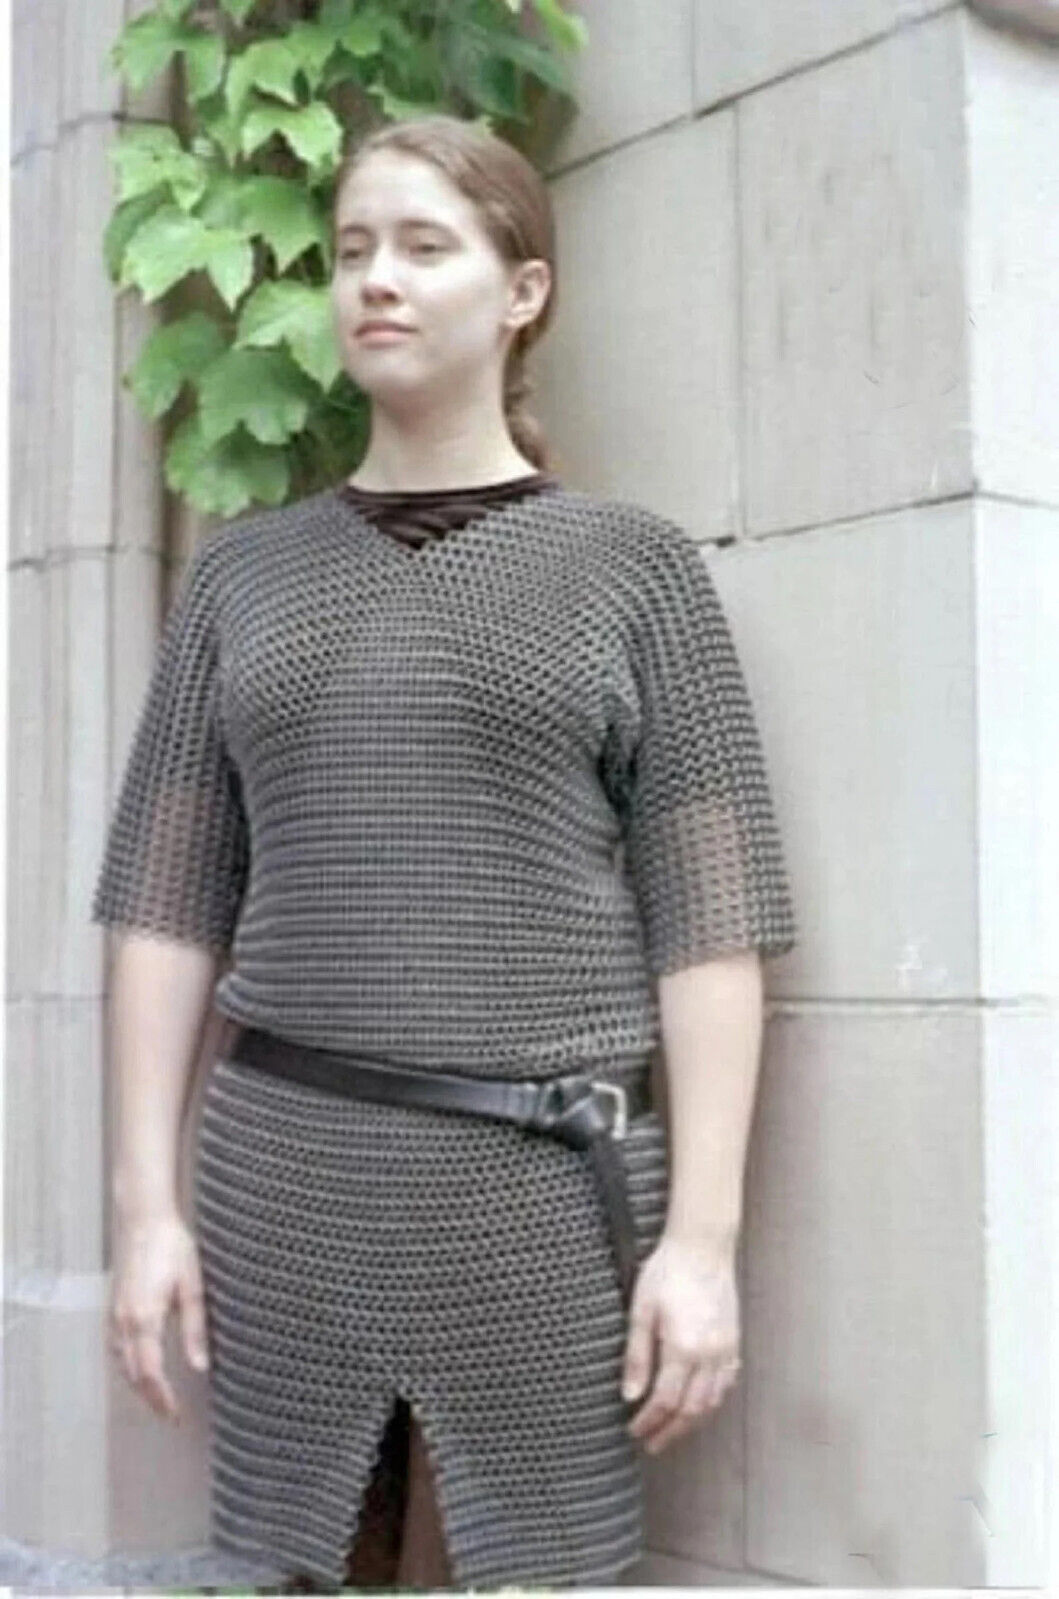 MEDIEVAL Chainmail Viking Long Shirt Haubergeon ARMOR BUTTED Aluminum best,girls